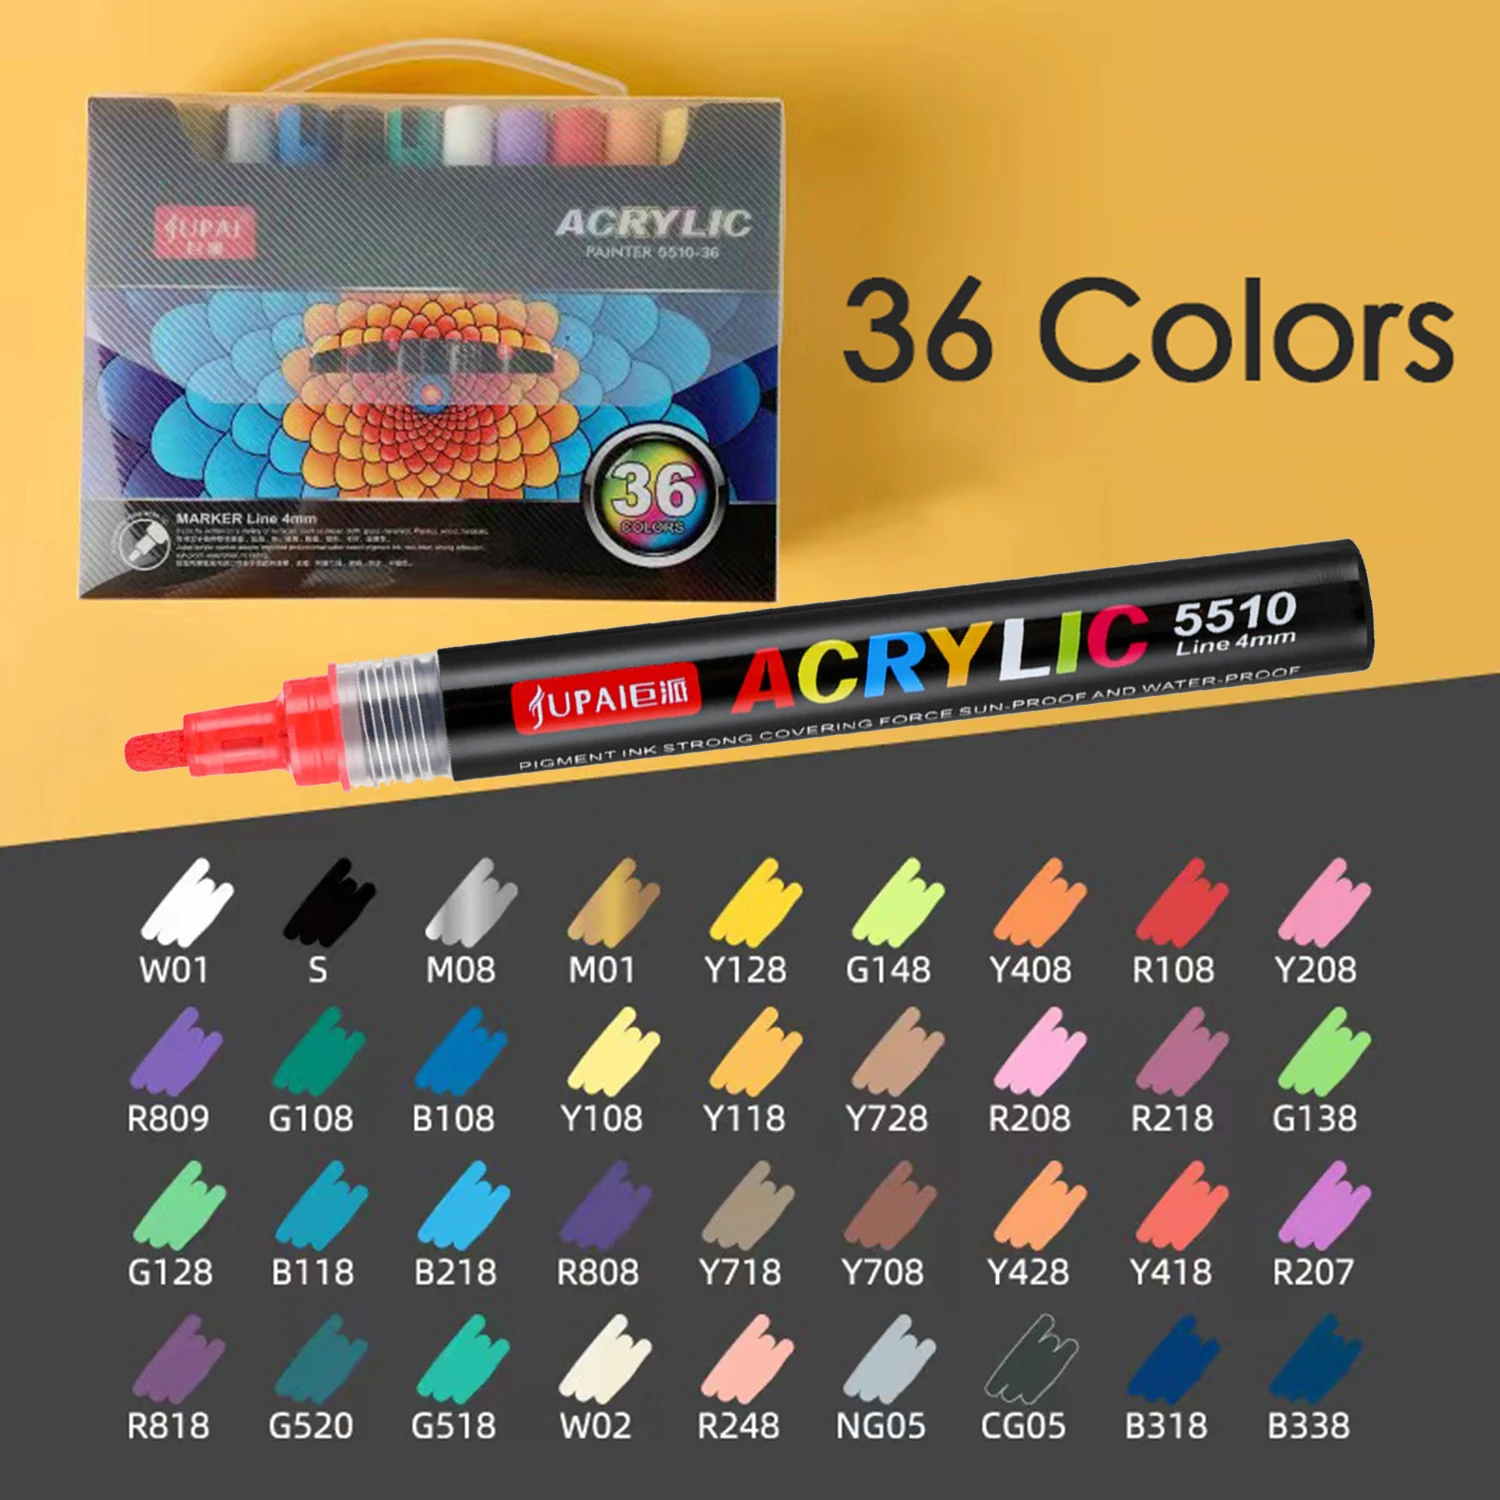 0.7mm Tip Acrylic Paint Markers,12 Colors Paint Pens,Graffiti Markers,Permanent  Markers for Kids DIY, Wood, Canvas,Glass,Rocks - AliExpress